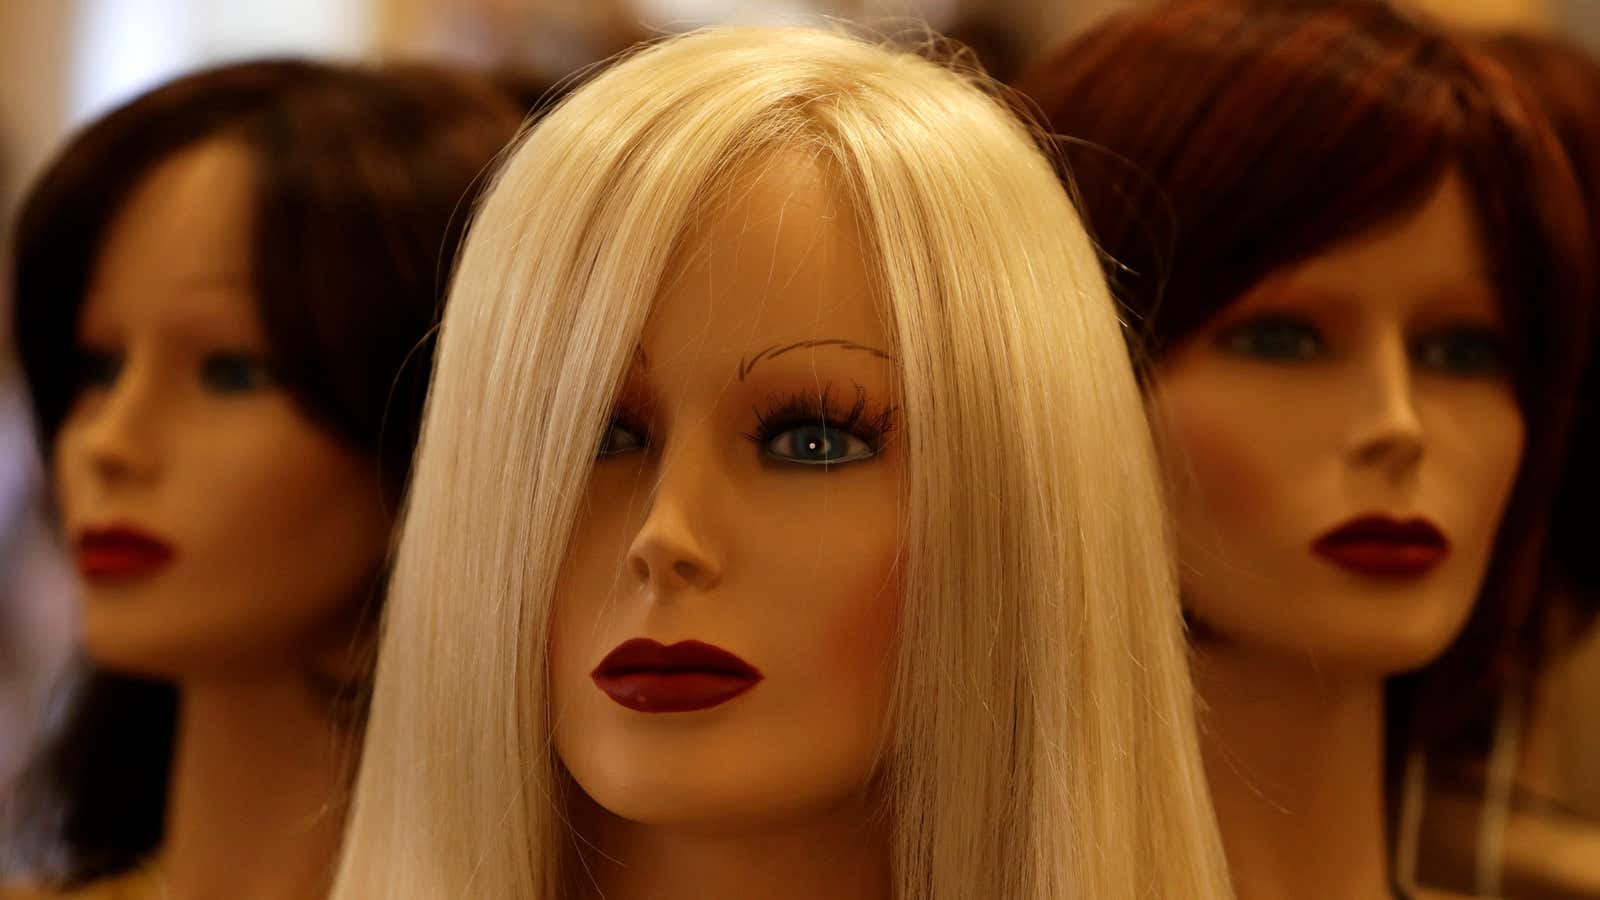 Mannequins, especially female, influence self image as stores show